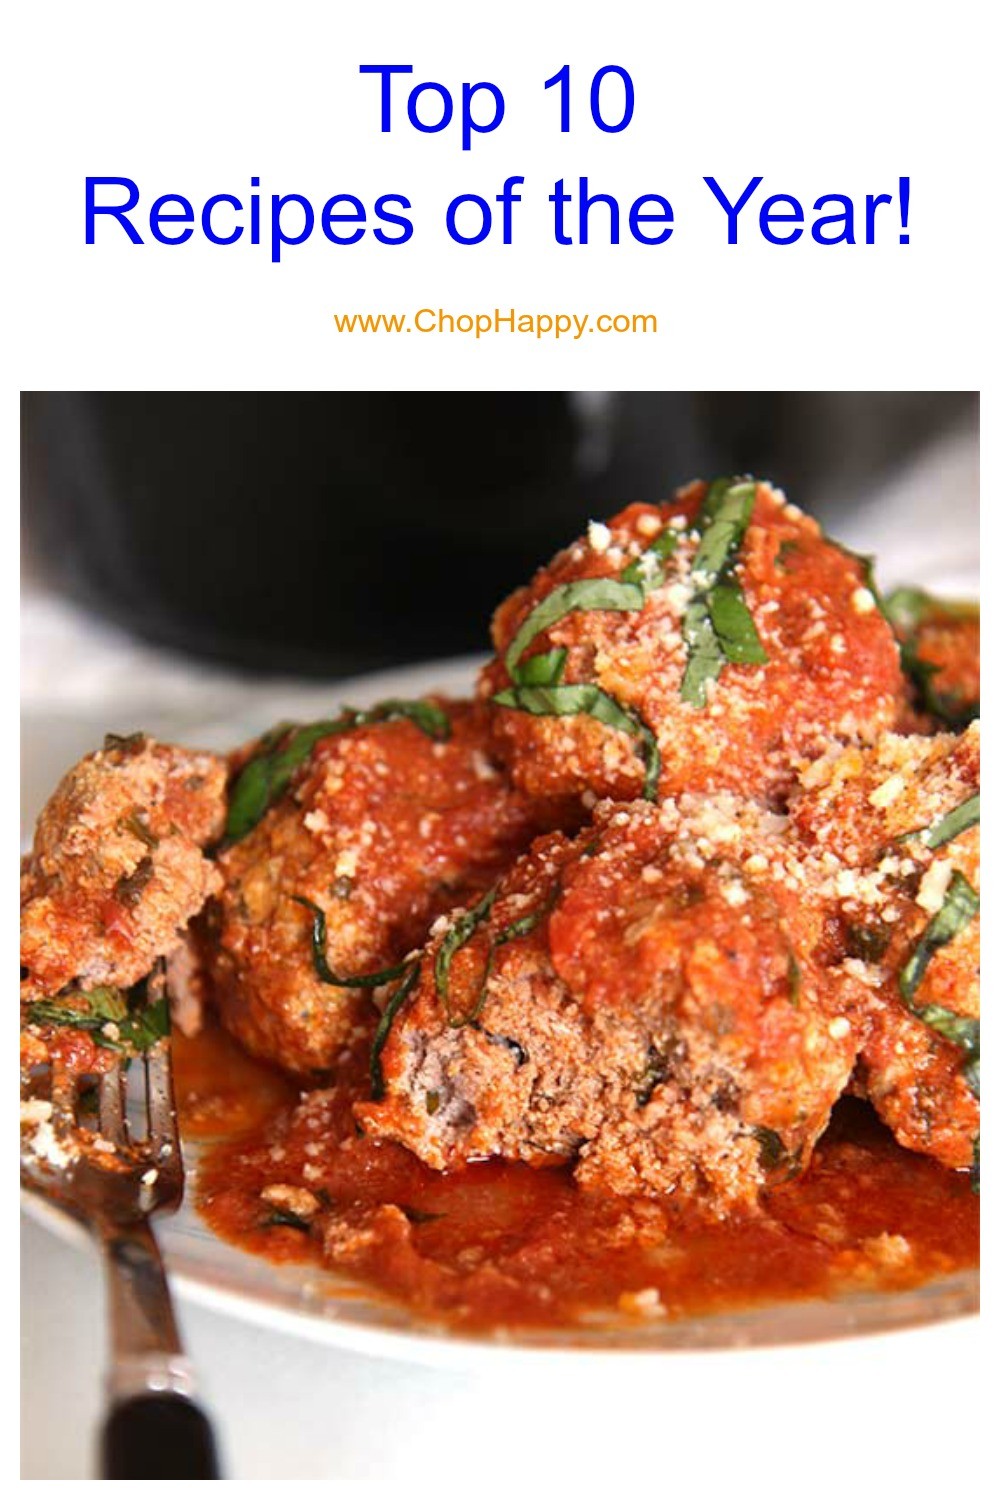 Top 10 Recipes of the Year. Lasagna, meatloaf, mac and cheese, and more fun recipes. Simple recipes for busy people. Happy Cooking! www.ChopHappy.com #toprecipe #easyrecipes